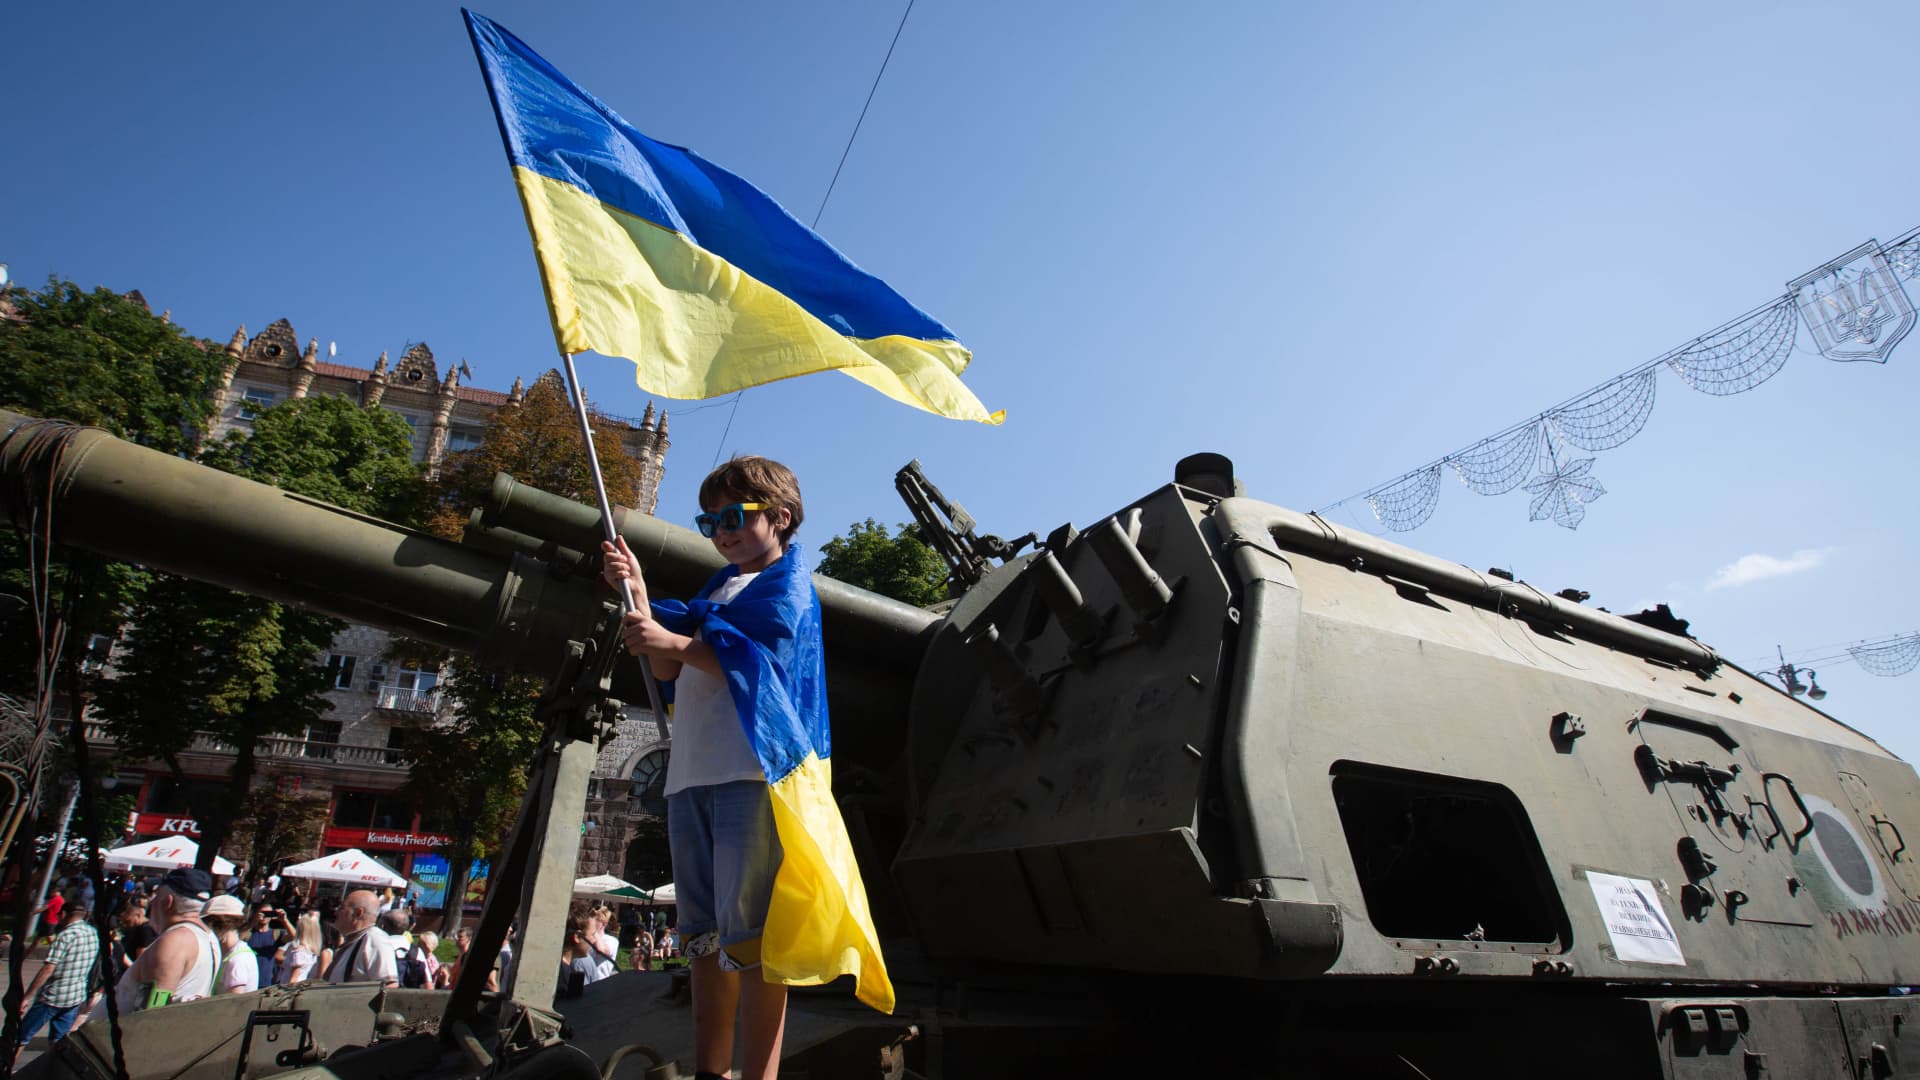 A boy with Ukrainian national flags poses for a photo while standing on a destroyed Russian military vehicle displayed on the main street Khreshchatyk as part of the upcoming celebration of the Independence Day of Ukraine amid Russia's invasion of Ukraine in central Kyiv. 